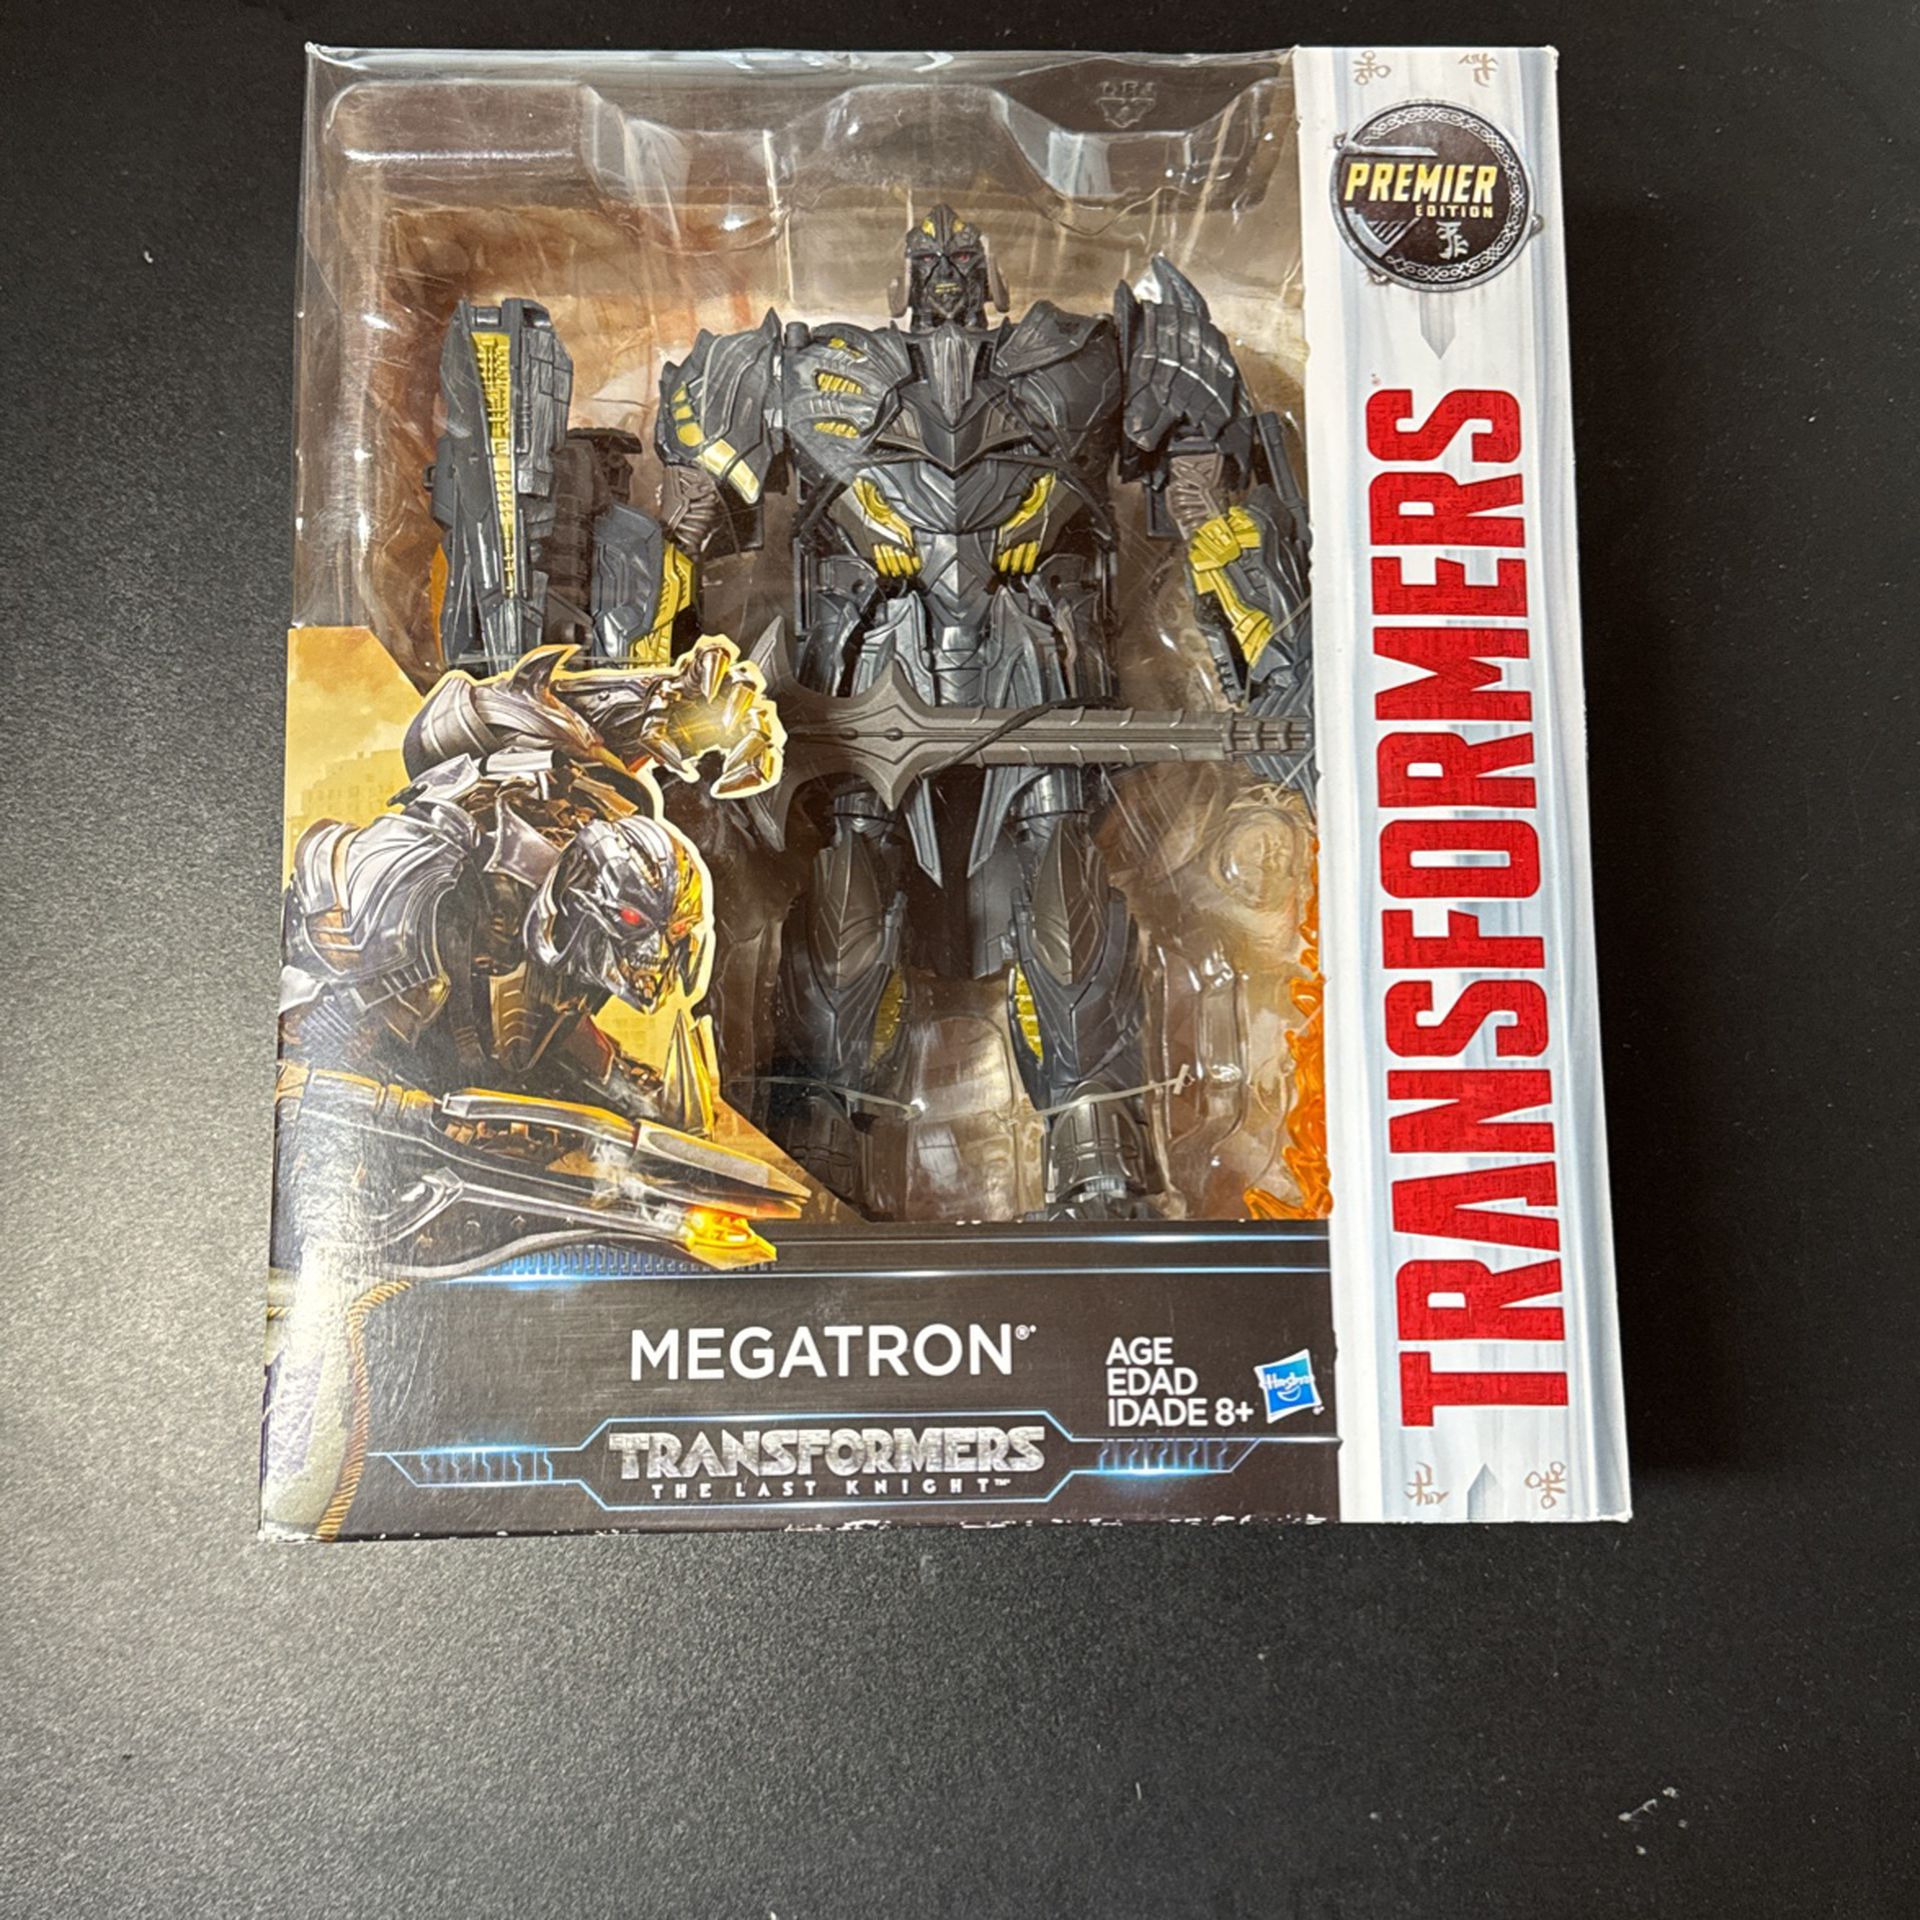 TRANSFORMERS THE LAST KNIGHT PREMIER EDITION LEADER CLASS MEGATRON ACTION FIGURE  Hasbro 2016 - Leader Class - NISB - Never Opened   